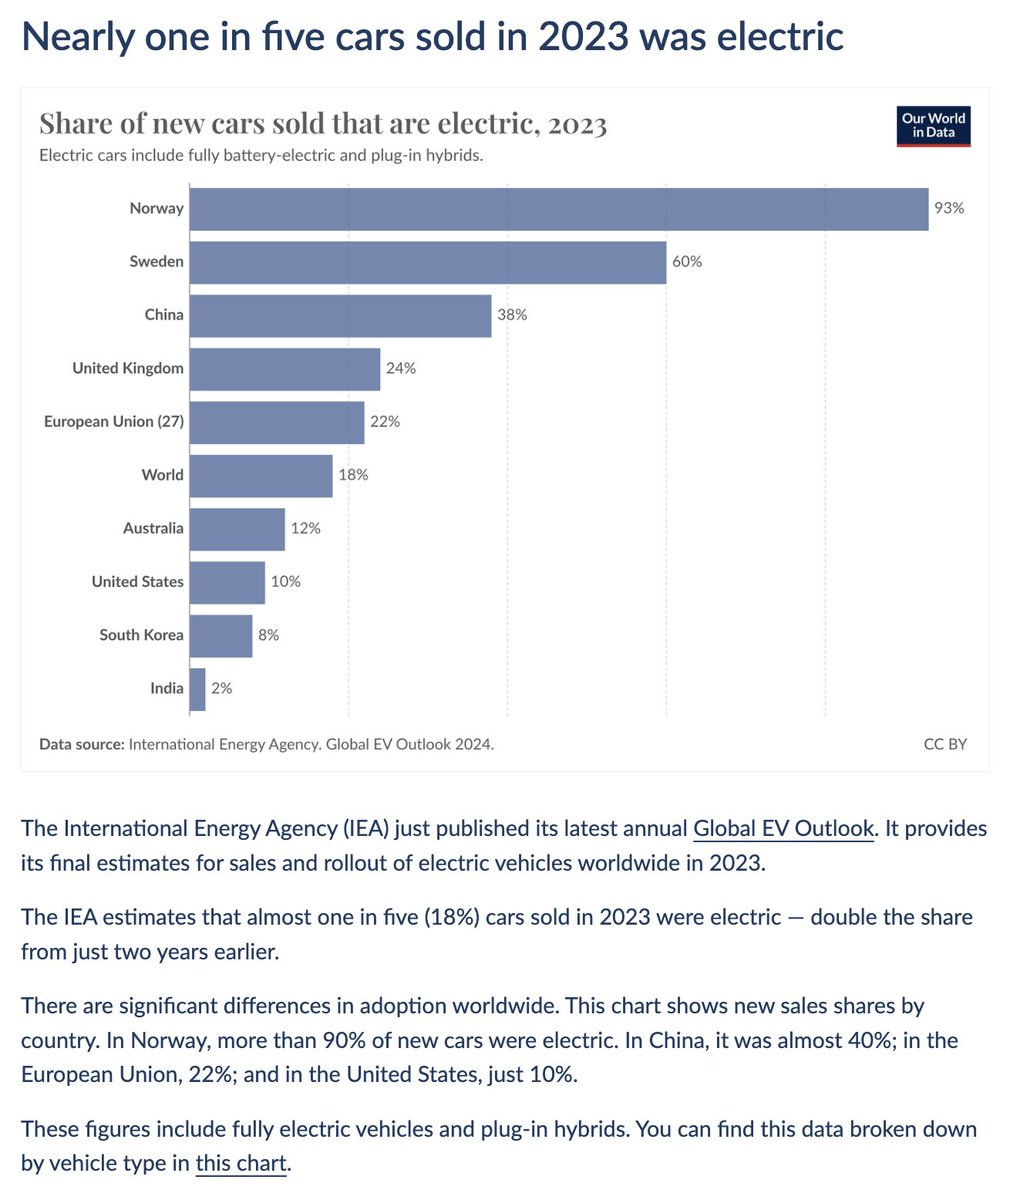 Nearly one in five cars sold in 2023 was electric Today's data insight is by @_HannahRitchie. You can find all of our Data Insights on their dedicated feed: ourworldindata.org/data-insights